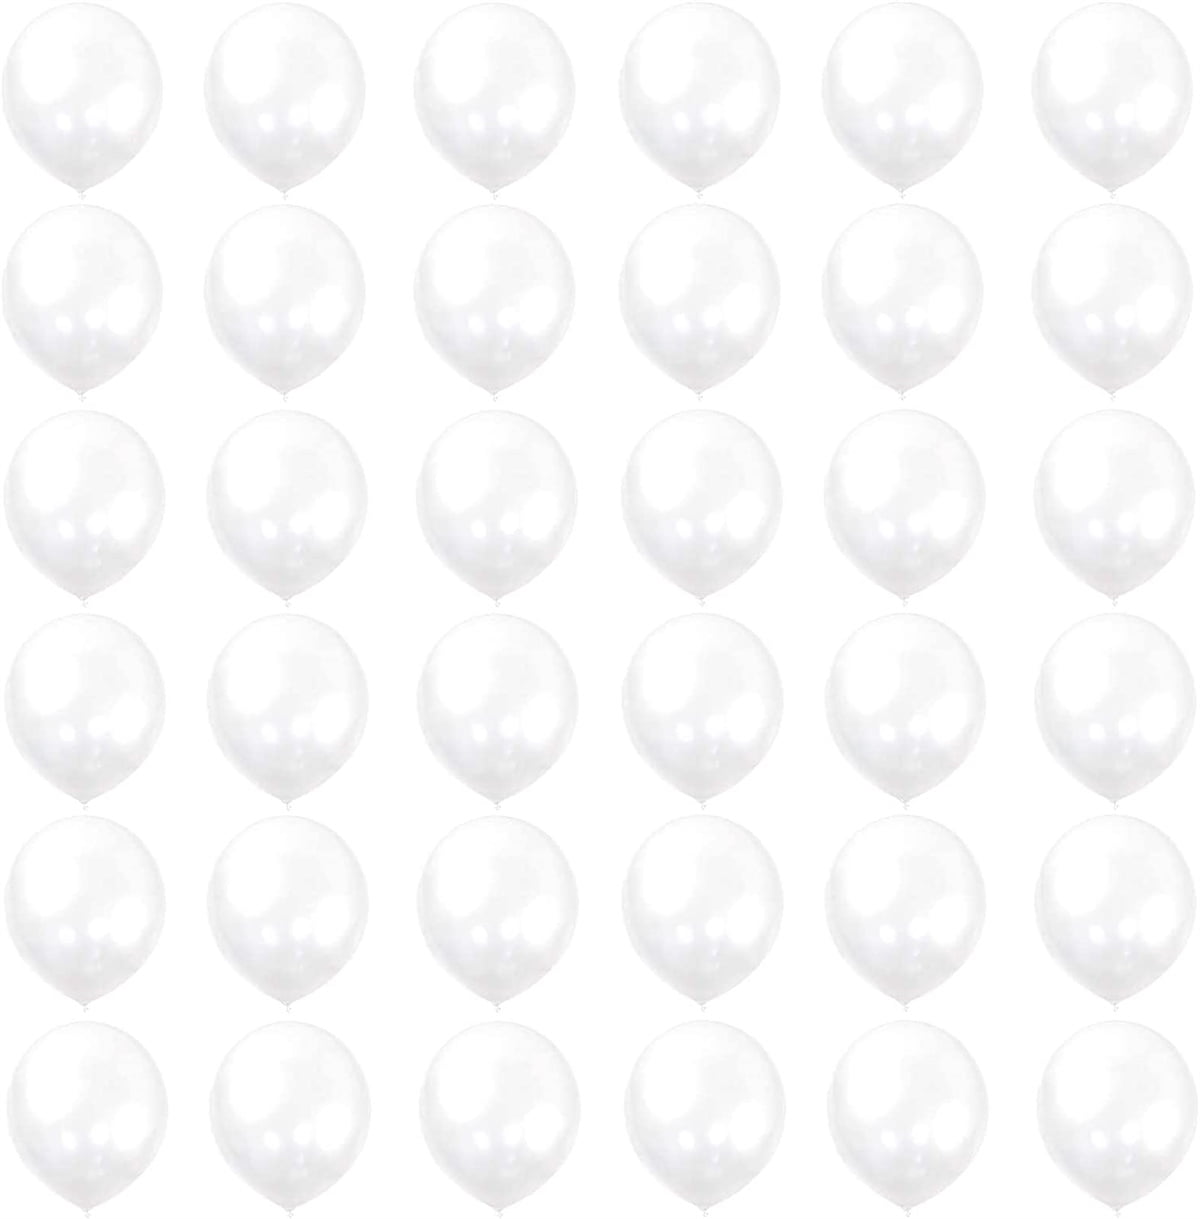 Casewin Bubble Clear Balloon 100 Pieces Mini Transparent Round